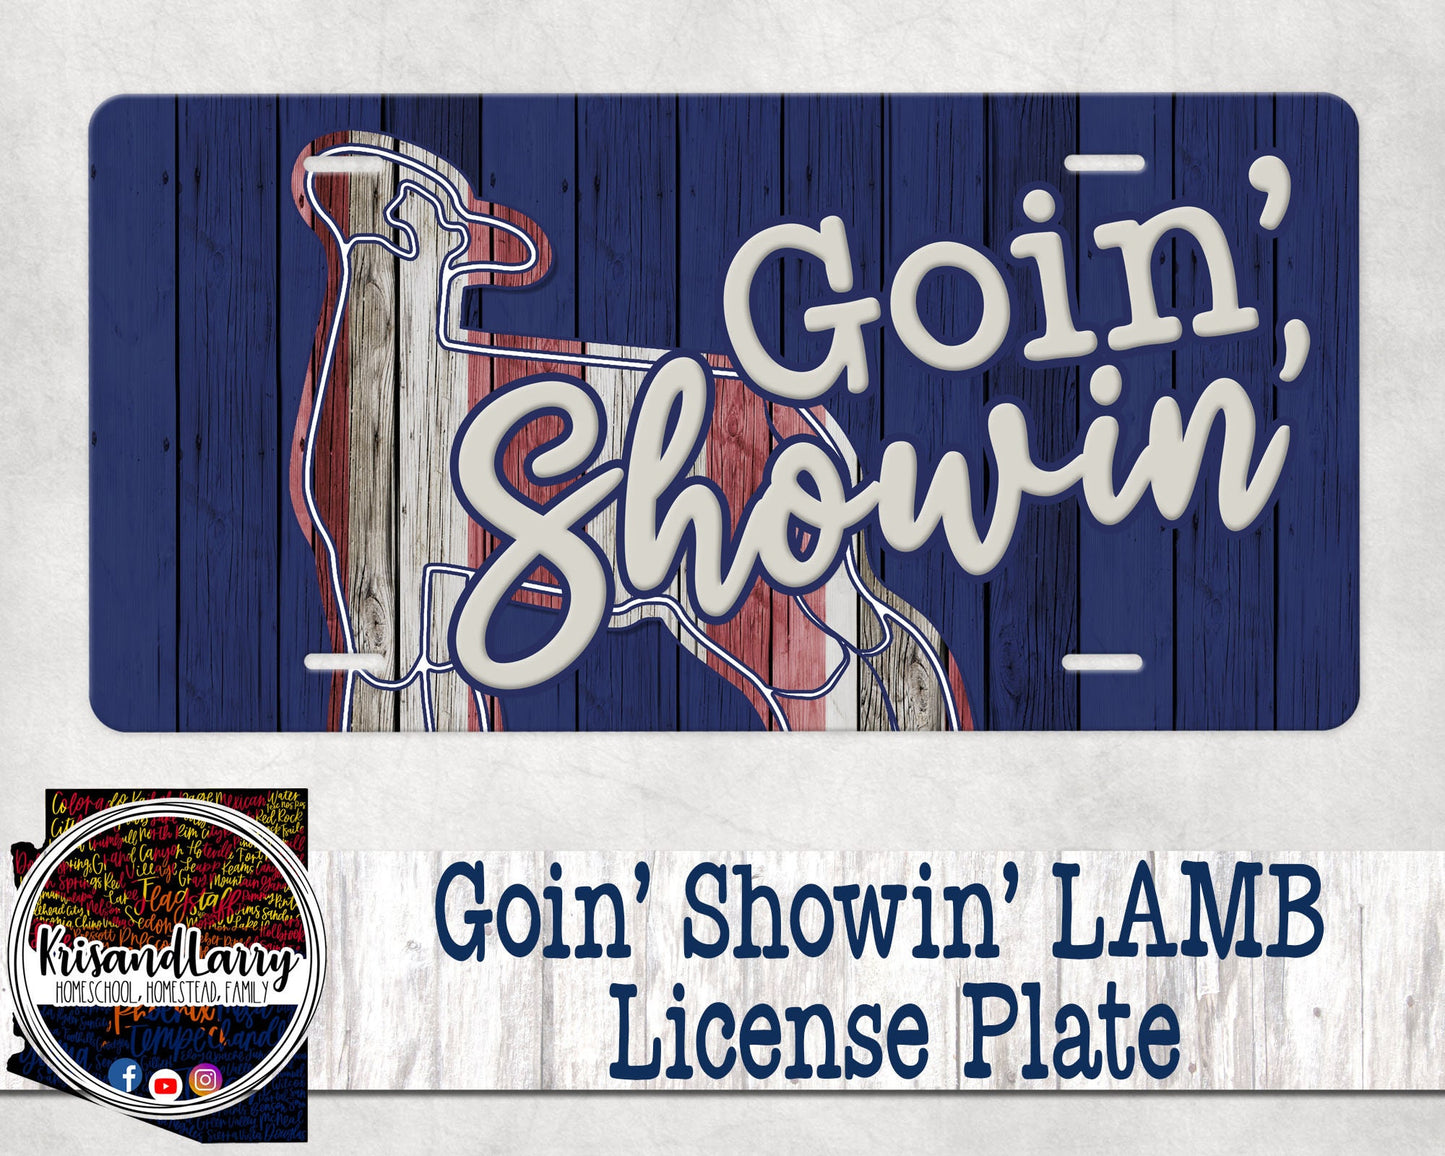 Goin' Showin' Red White and Blue American Lamb Livestock License Plate,